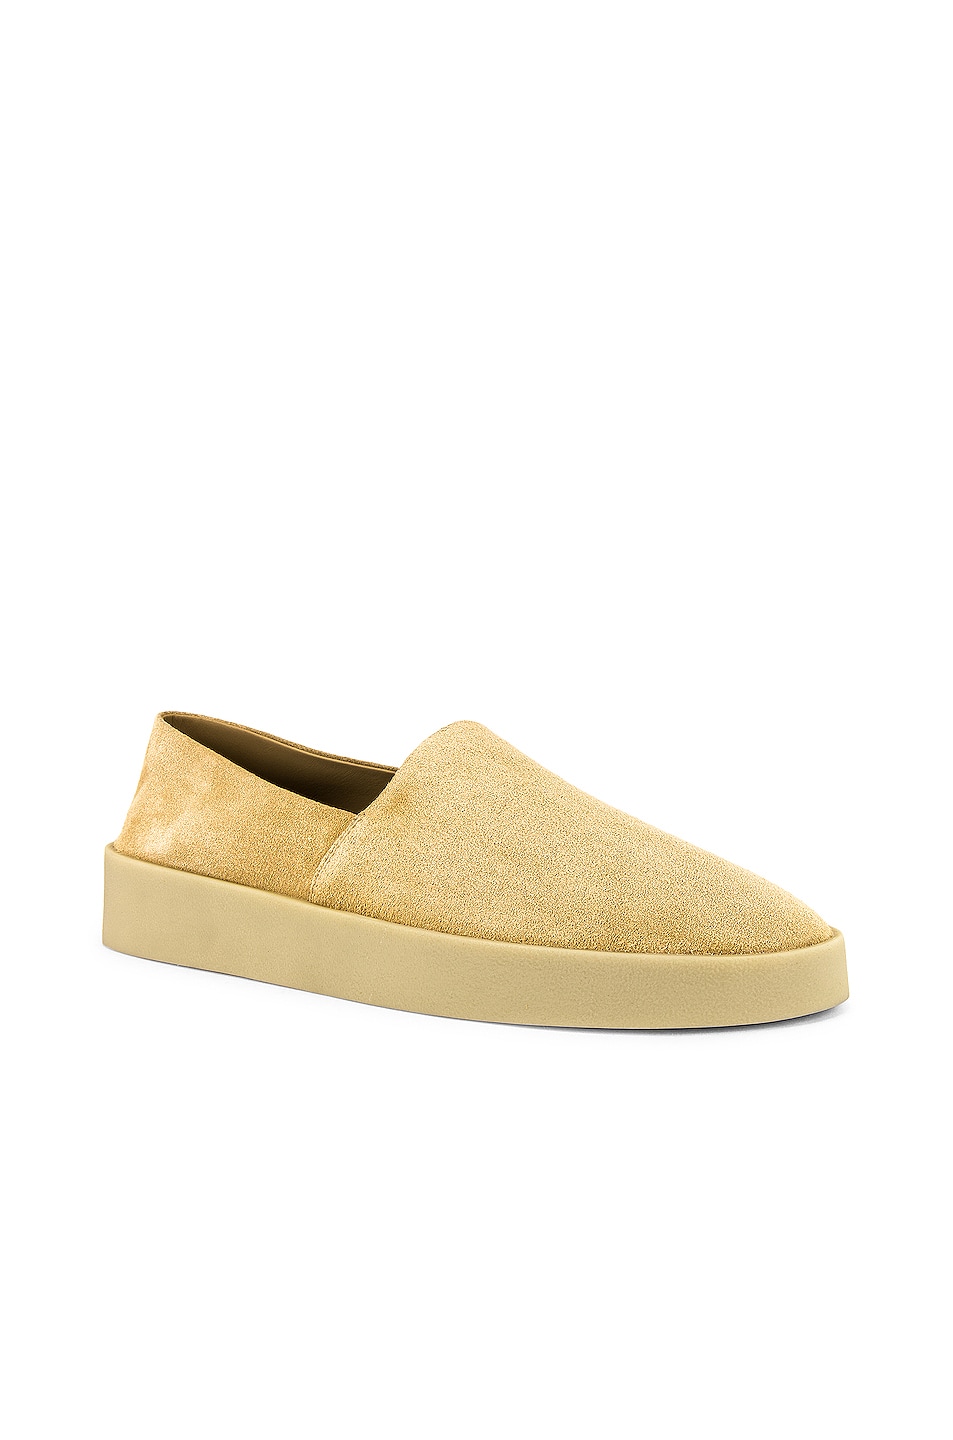 Image 1 of Fear of God Exclusively for Ermenegildo Zegna Suede Leather Espadrille in Camel